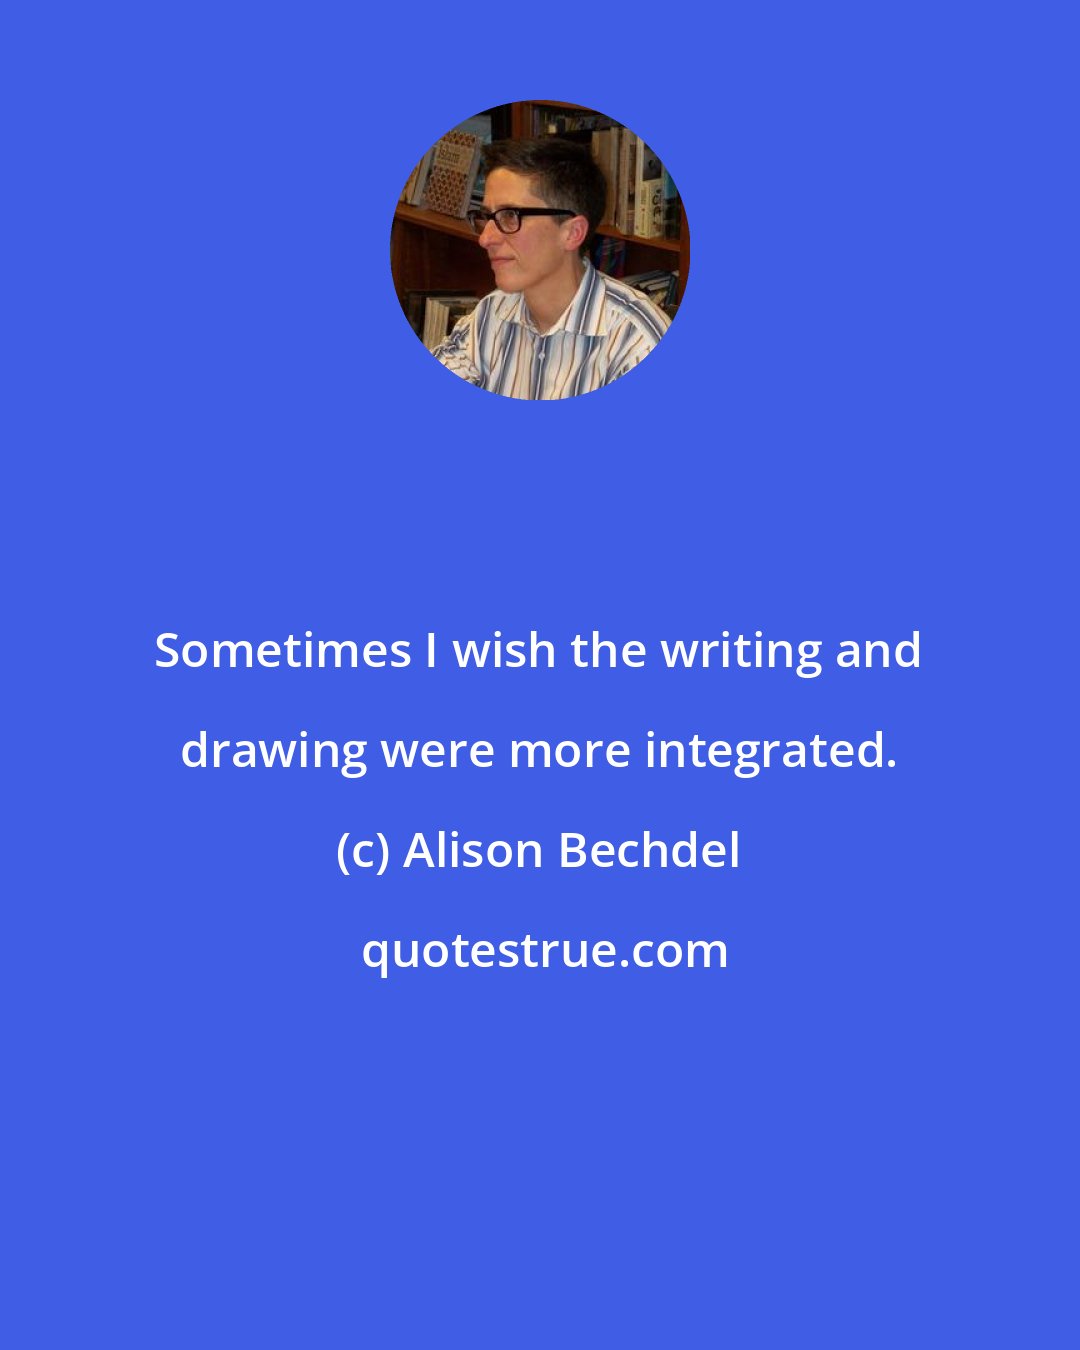 Alison Bechdel: Sometimes I wish the writing and drawing were more integrated.